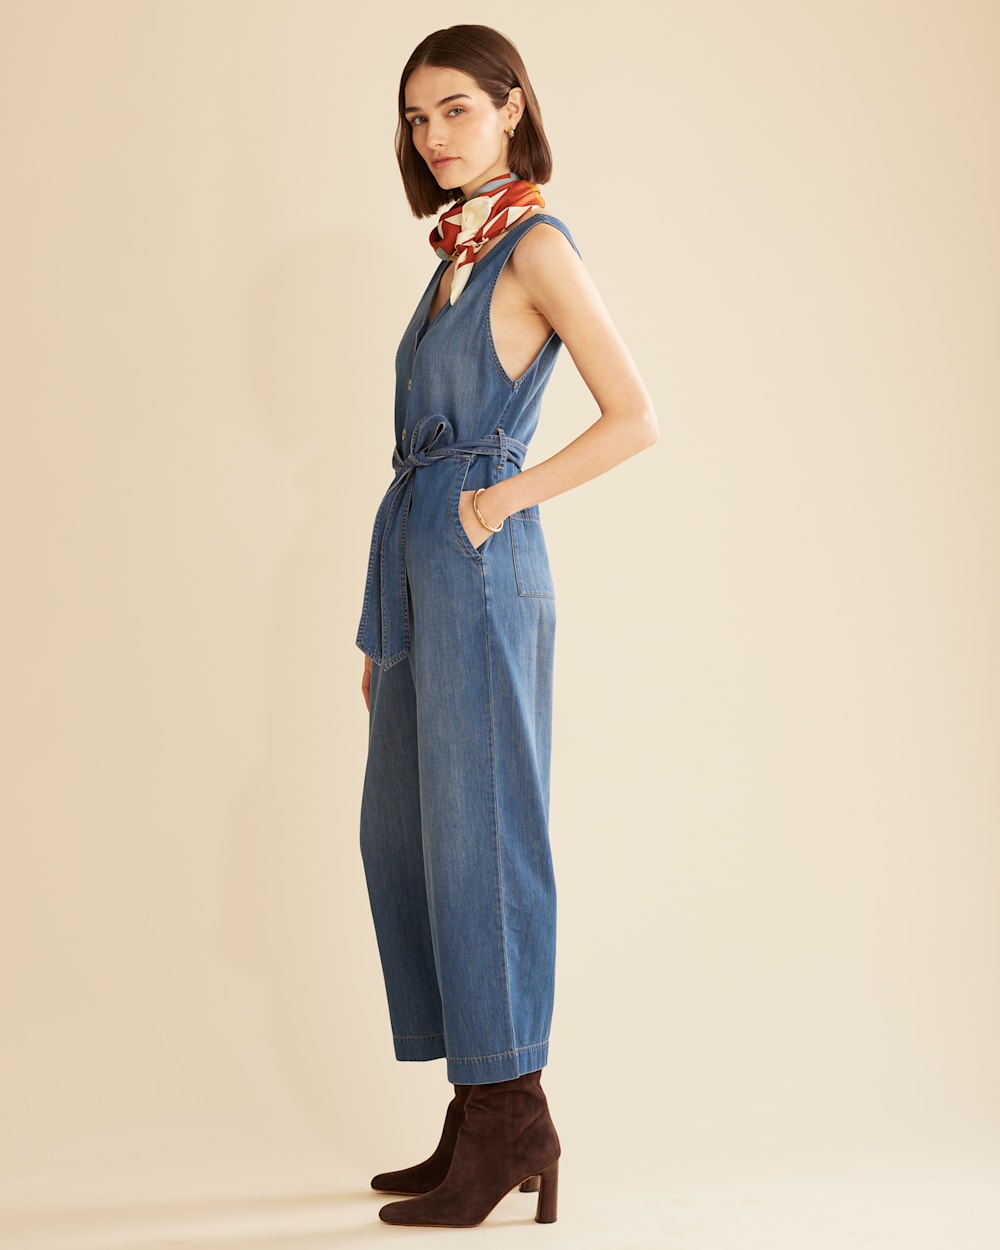 ALTERNATE VIEW OF WOMEN�S CHAMBRAY JUMPSUIT IN MEDIUM BLUE image number 2